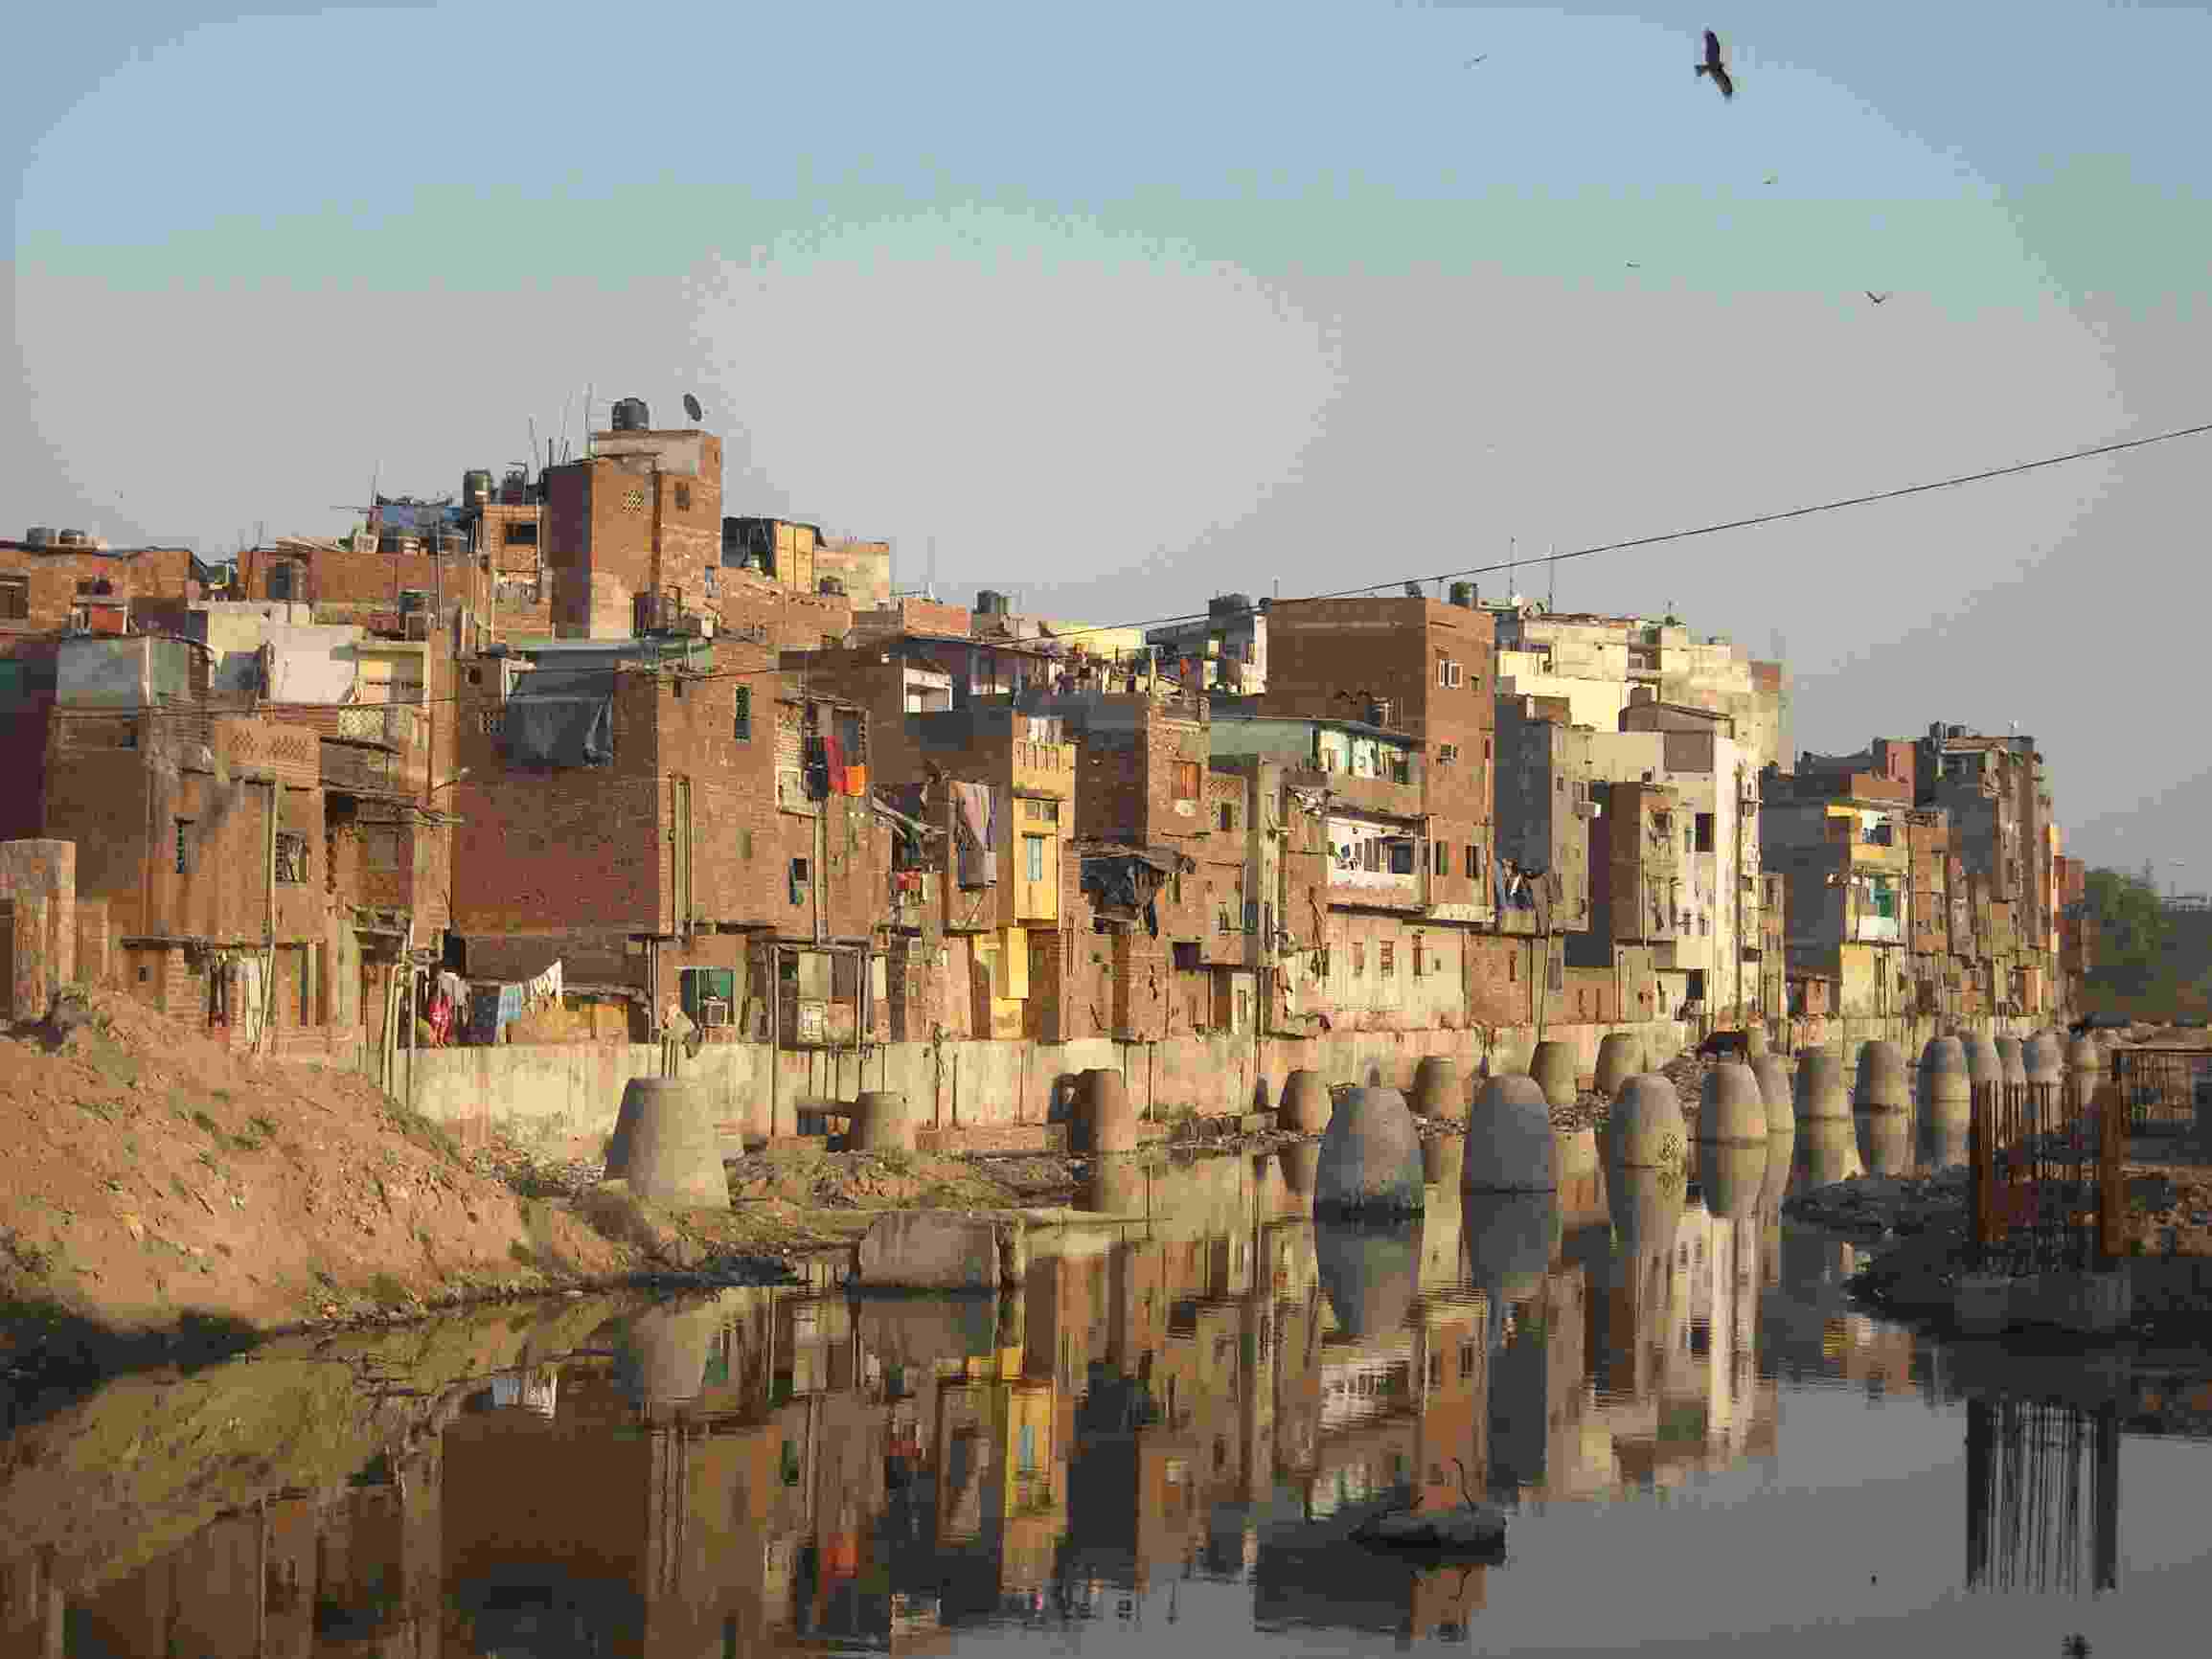 Image shows an informal settlement on the water's edge in Delhi